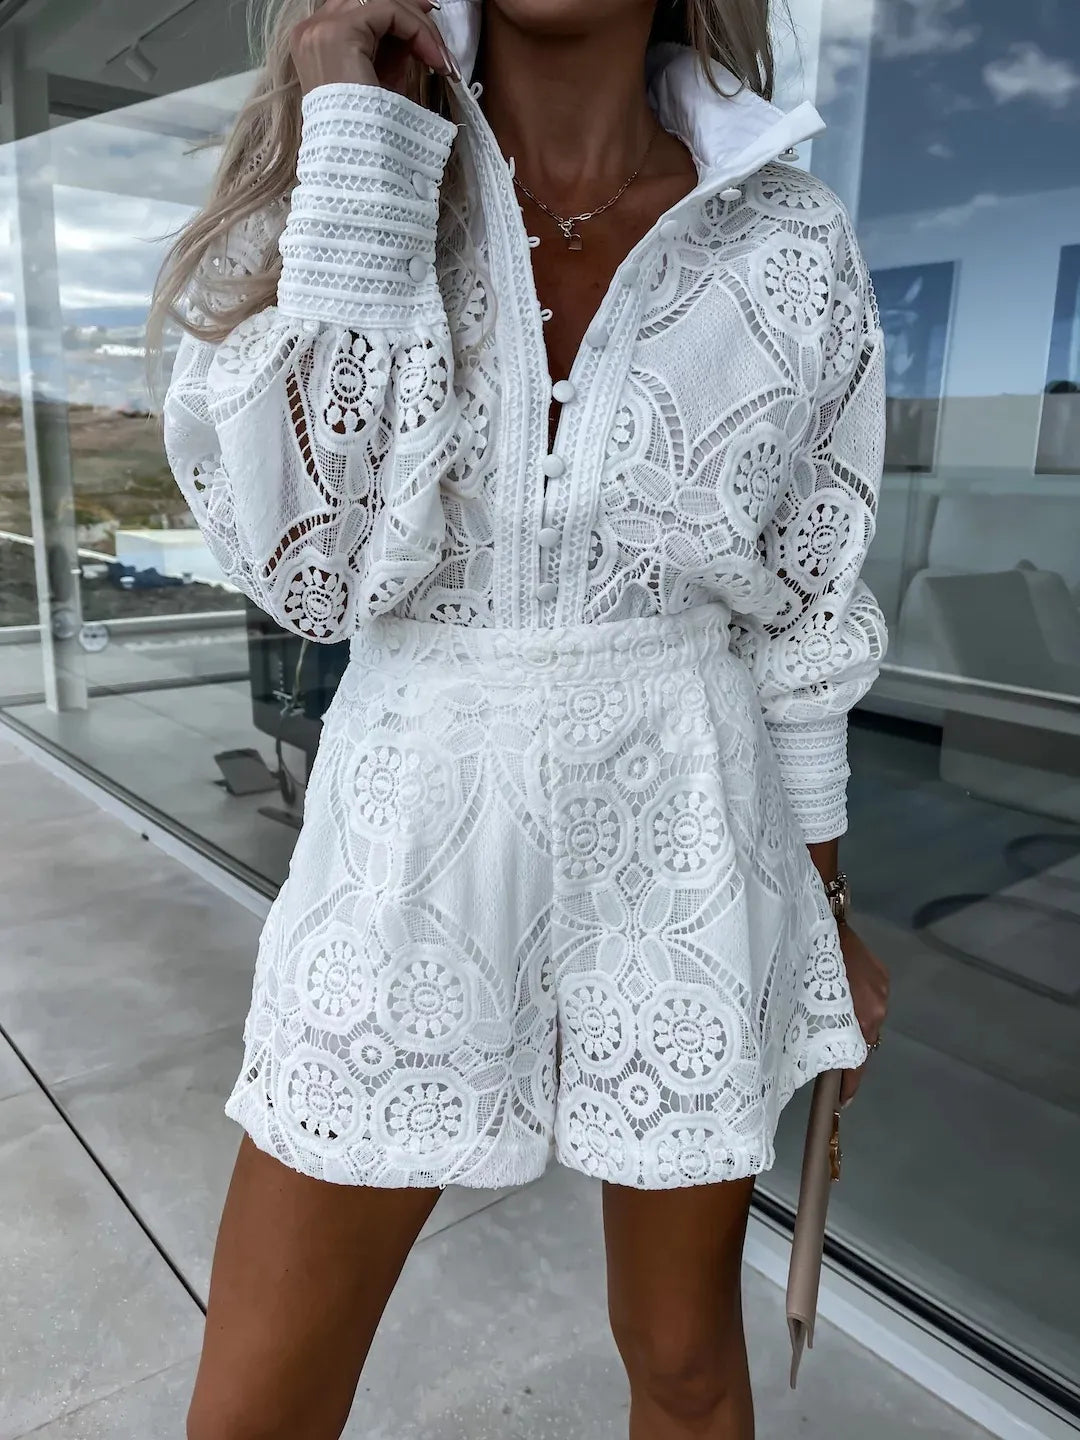 Foridol Vintage Single Breasted White Lace Women Shorts Sets Spring Long Sleeve Casual Party 2 Pcs Outfits Femme Suit Summer